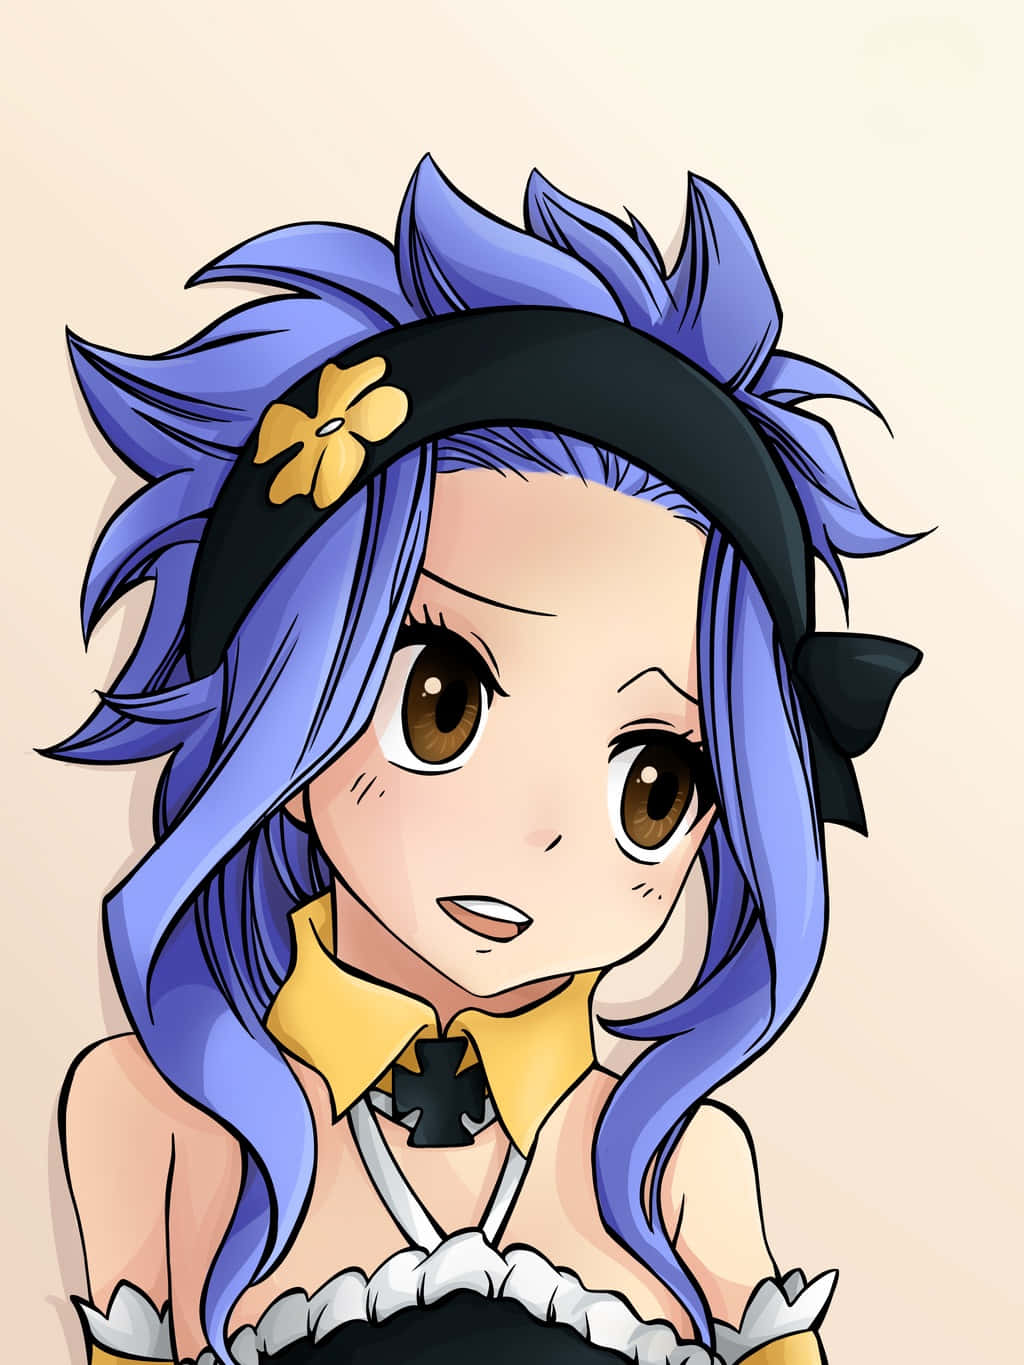 Levy Mcgarden, the intelligent Fairy Tail mage Wallpaper